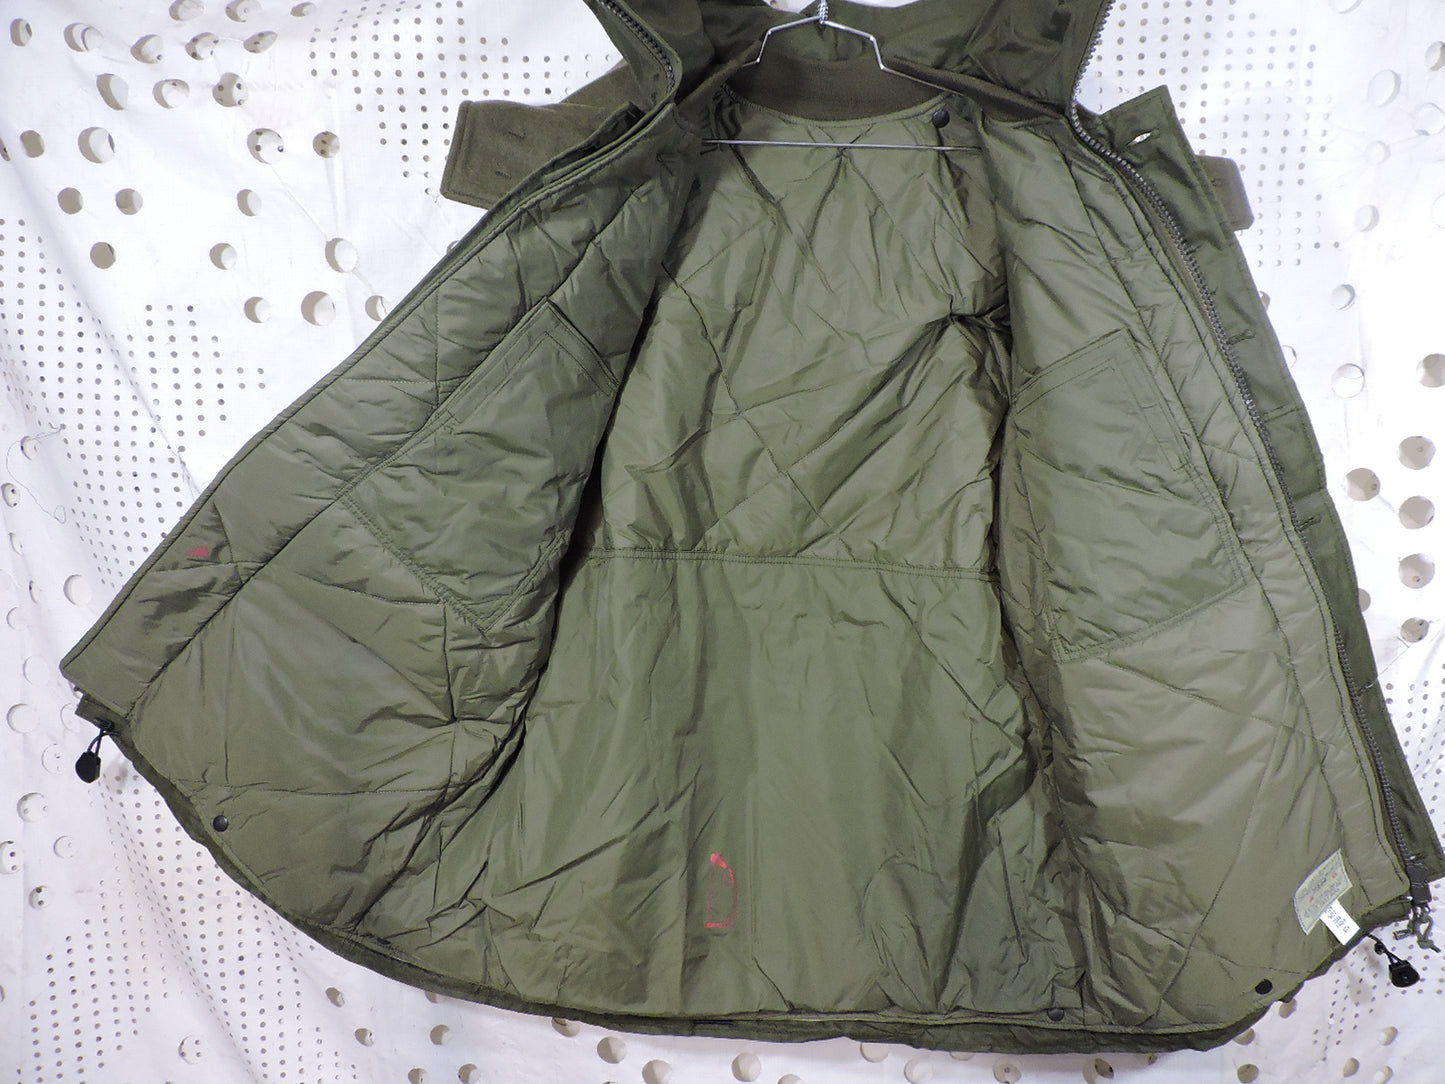 New Condition Canadian Army Goretex Iecs Parka Size Tall Large 7344